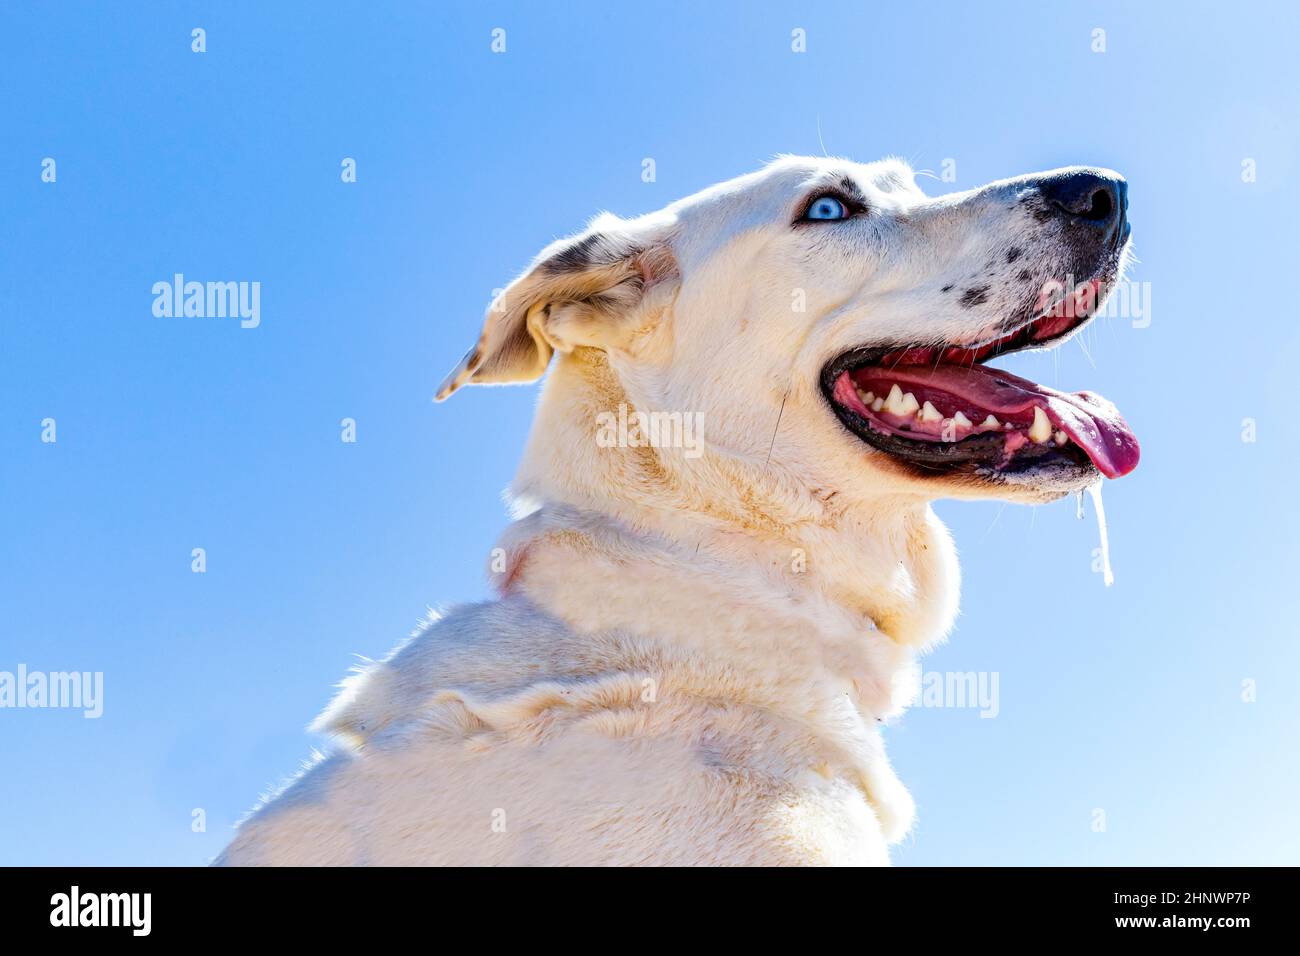 white Estrela mountain dog rests at the beach under clear sky Stock Photo